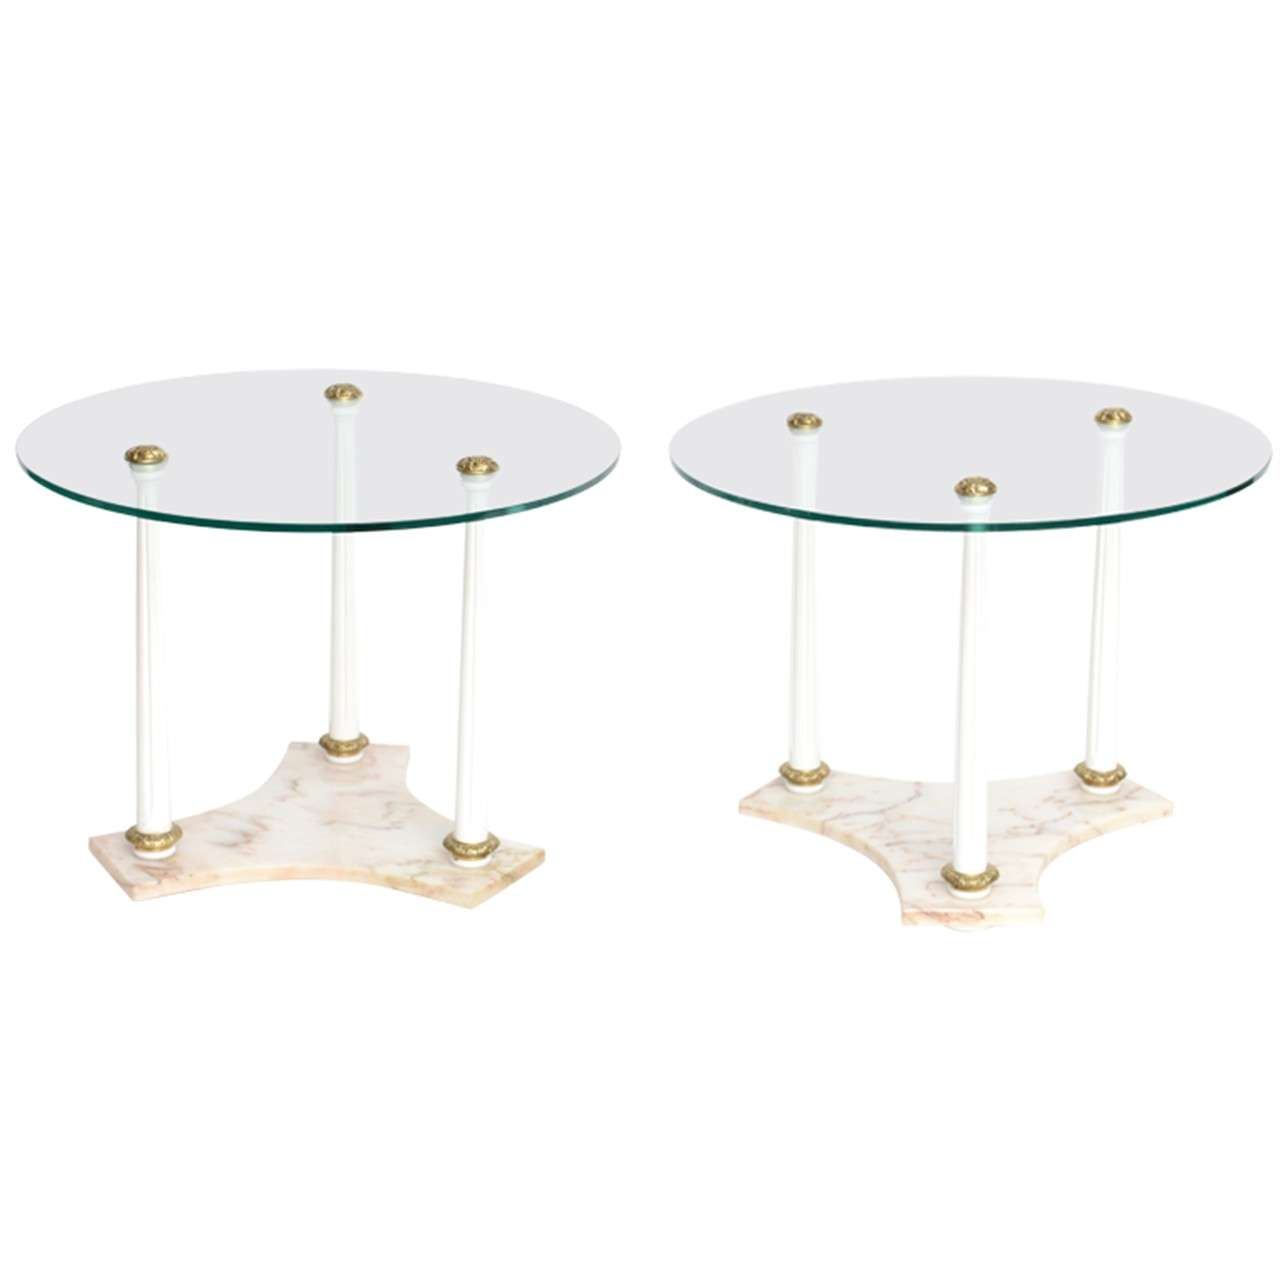 SALE! SALE! SALE! PR/NEOCLASSICAL SIDE TABLES  FLUTED legs marble base For Sale